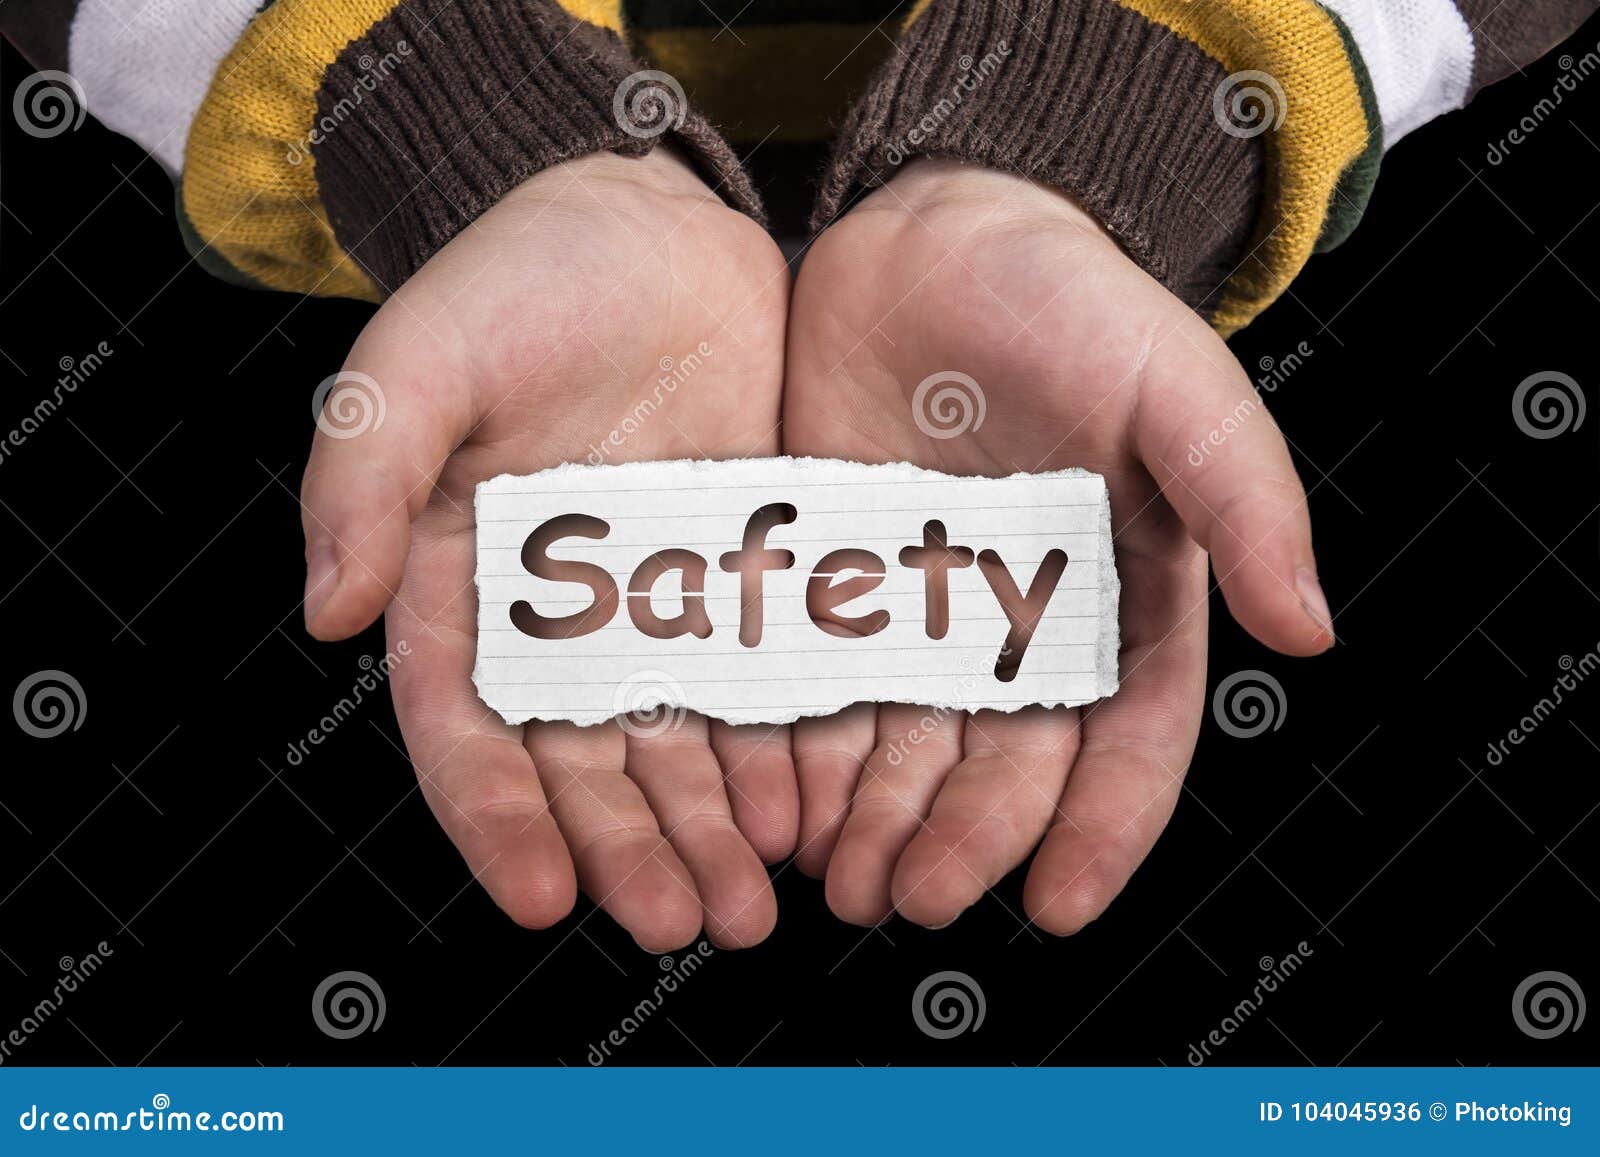 safety text on hand